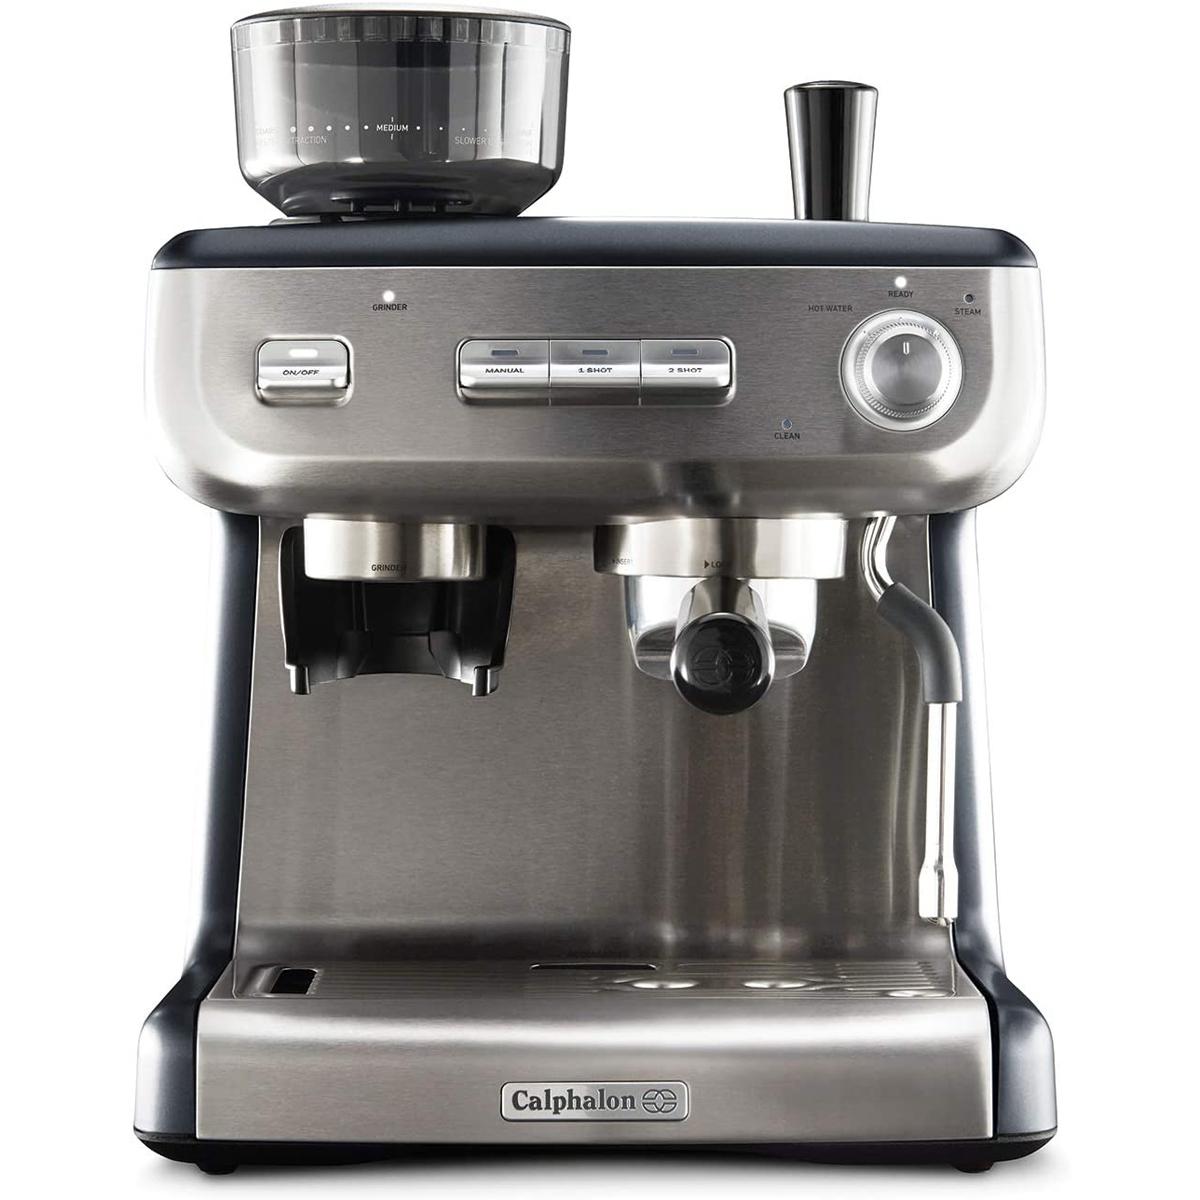 Calphalon Temp IQ Espresso Machine with Grinder and Steam Wand for $419.99 Shipped